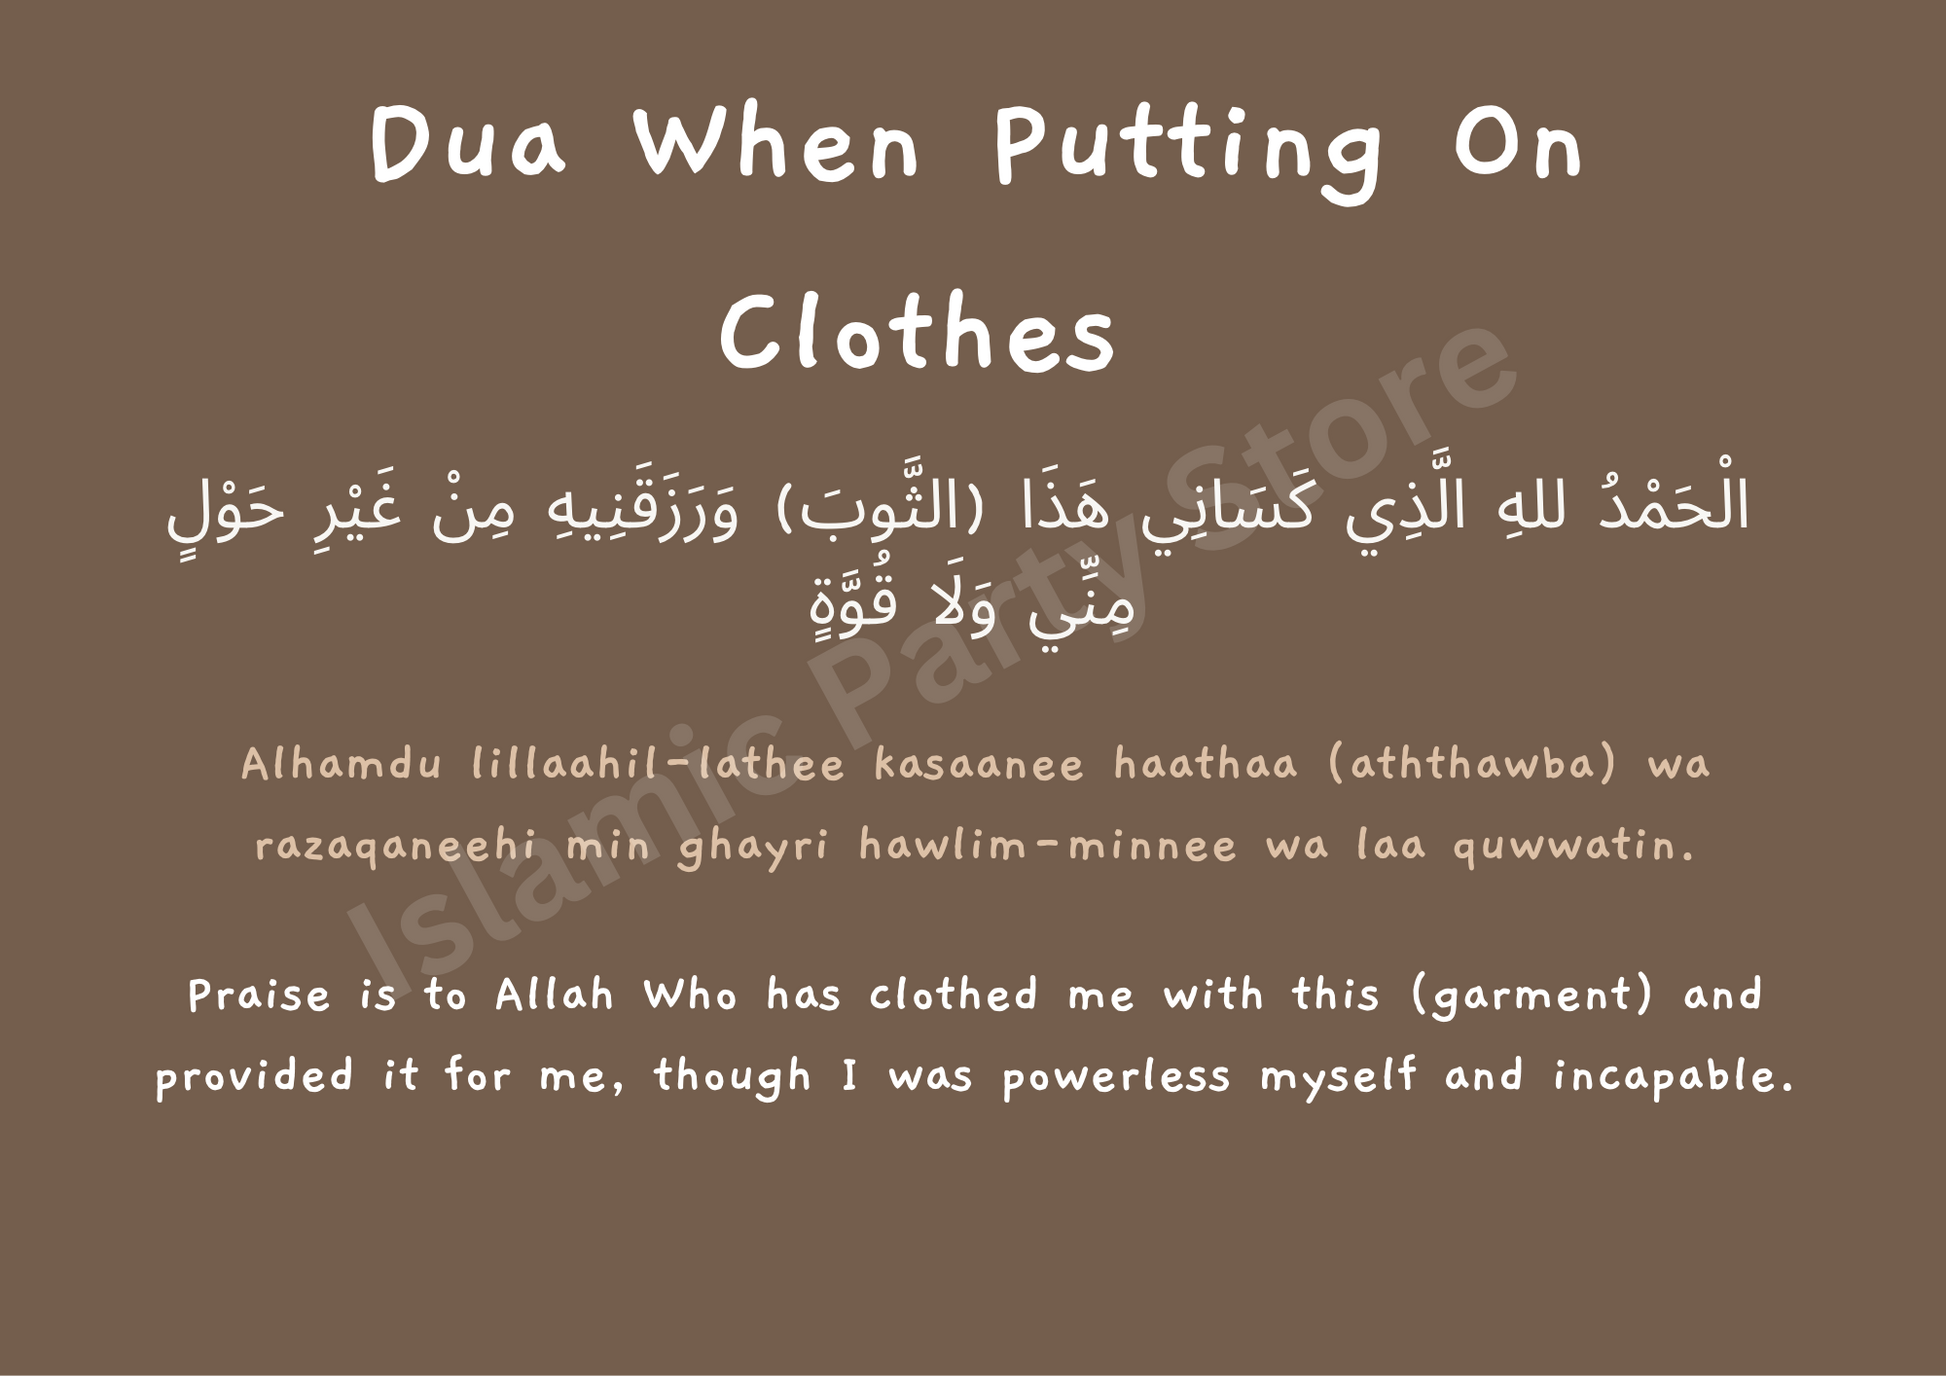 Dua When Putting on Clothes